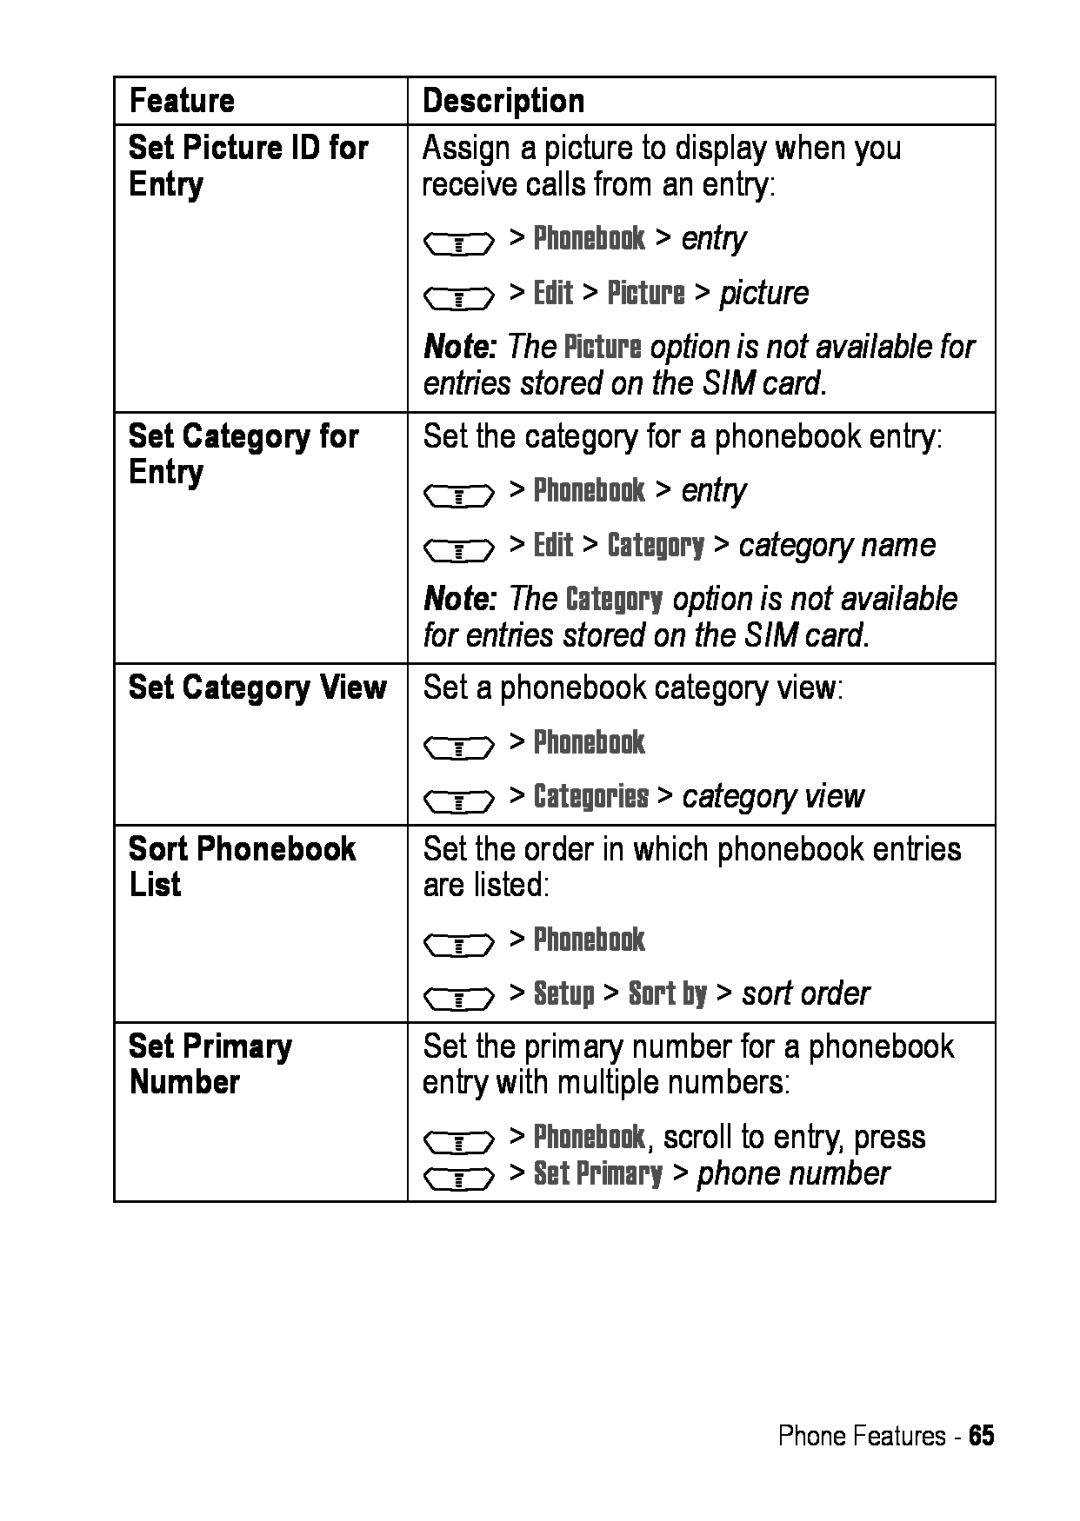 Motorola C390 manual M Edit Picture picture, entries stored on the SIM card, M Categories category view, M Phonebook entry 